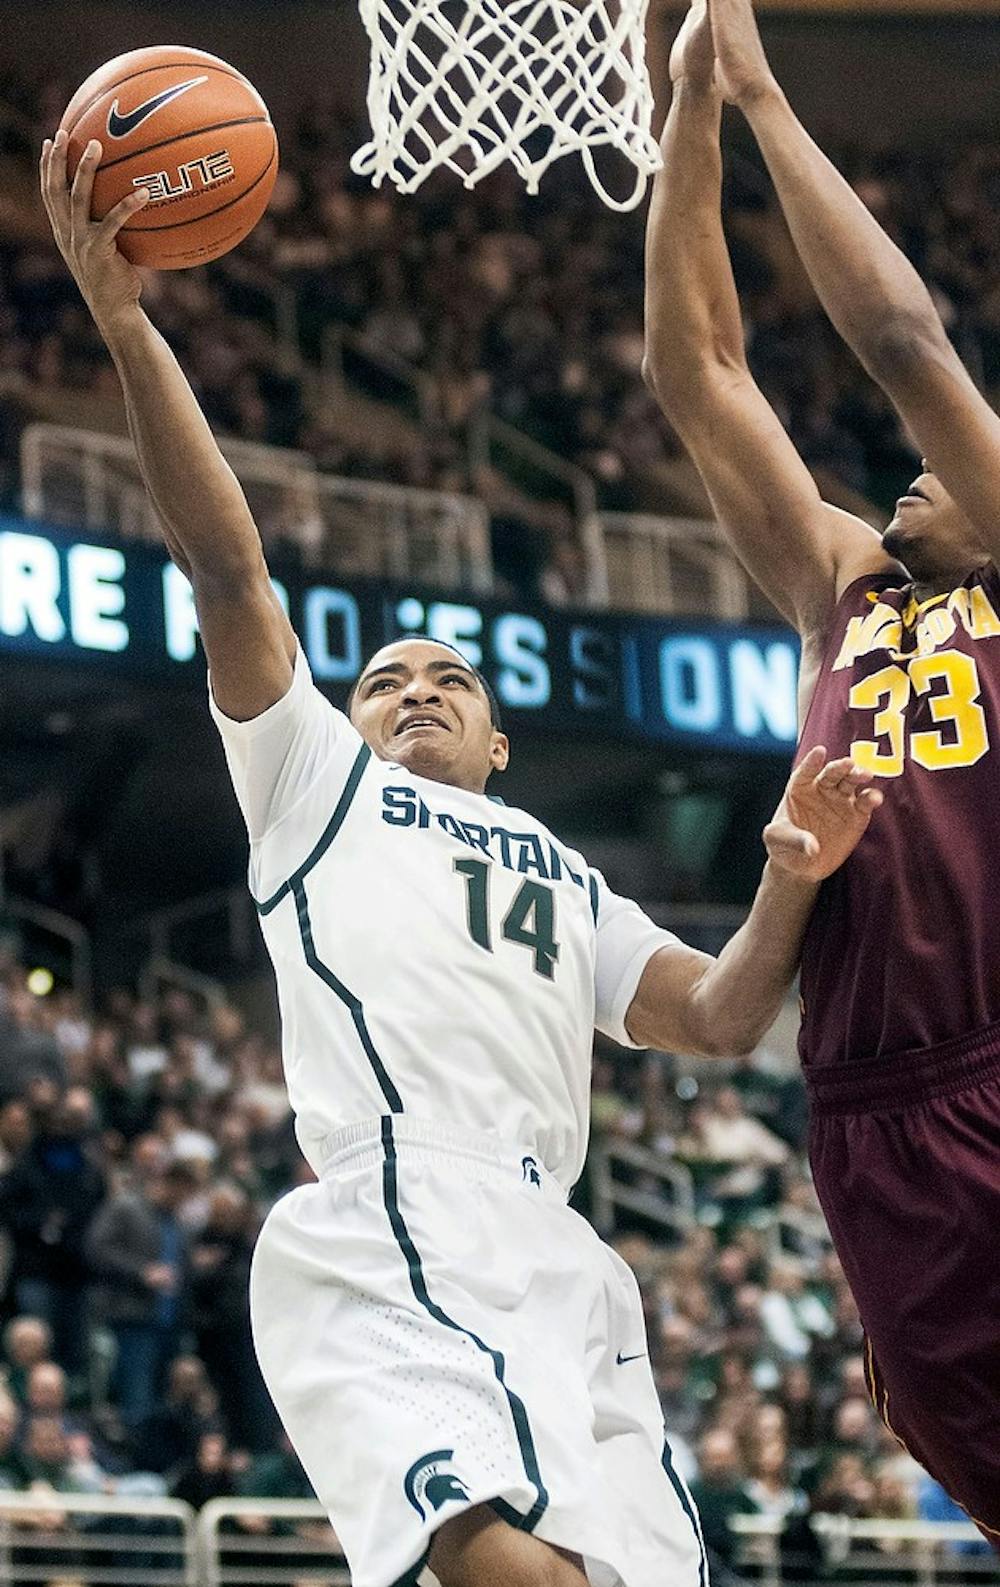 	<p>Freshman guard Gary Harris jumps for a layup Wednesday, Feb. 6, 2013, at Breslin Center. The Spartans defeated the Golden Gophers, 61-50, improving their record to 8-2 in the Big Ten. Adam Toolin/The State News</p>